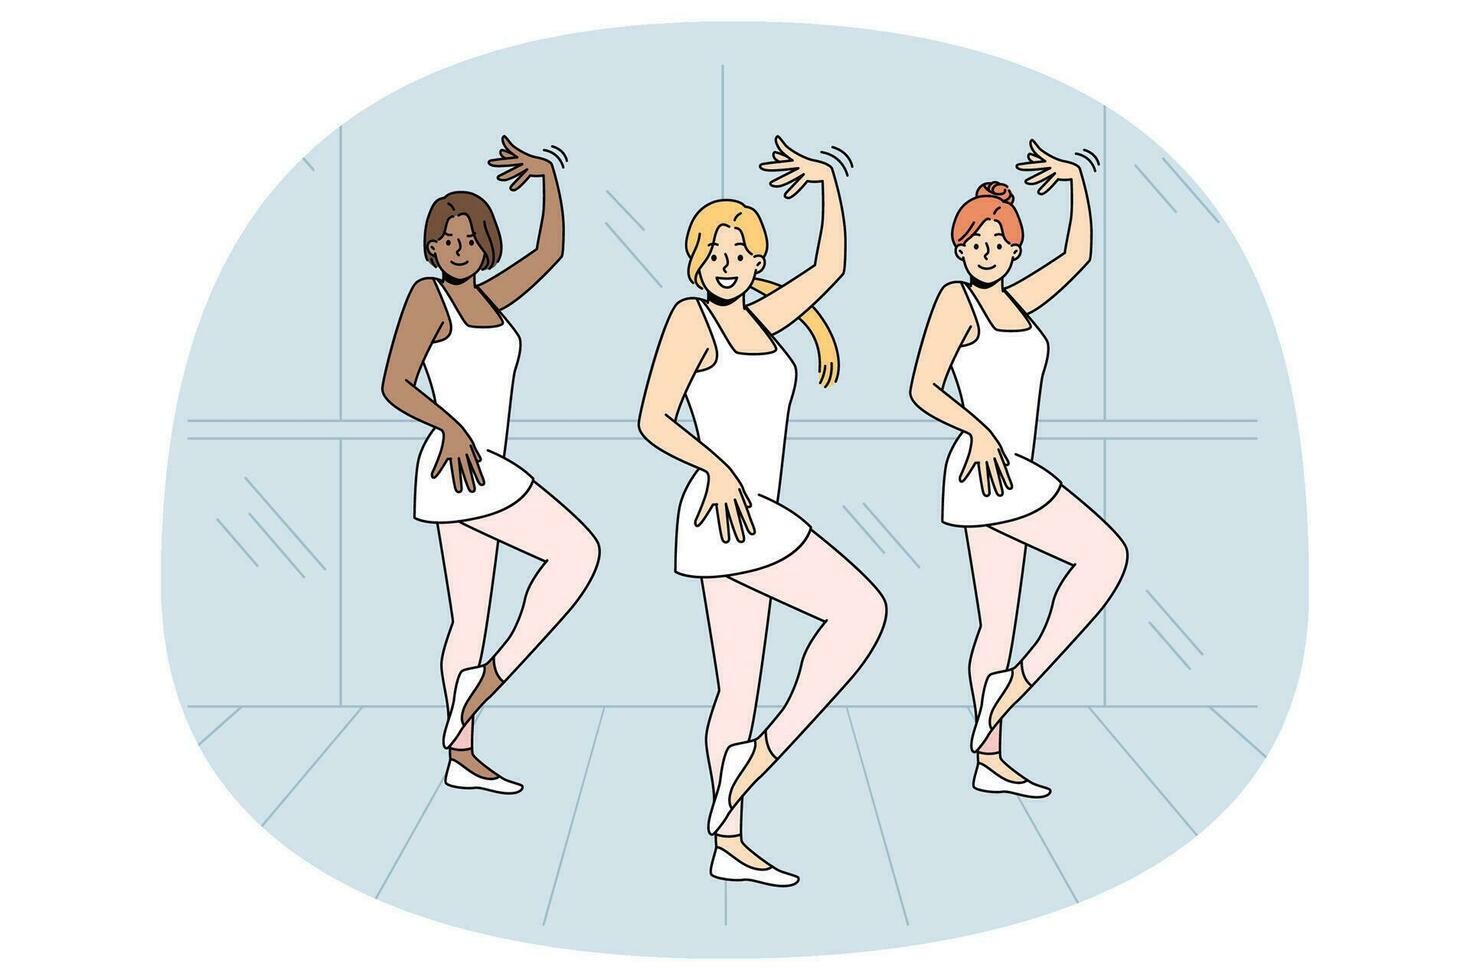 Ballerinas dancing together on stage vector